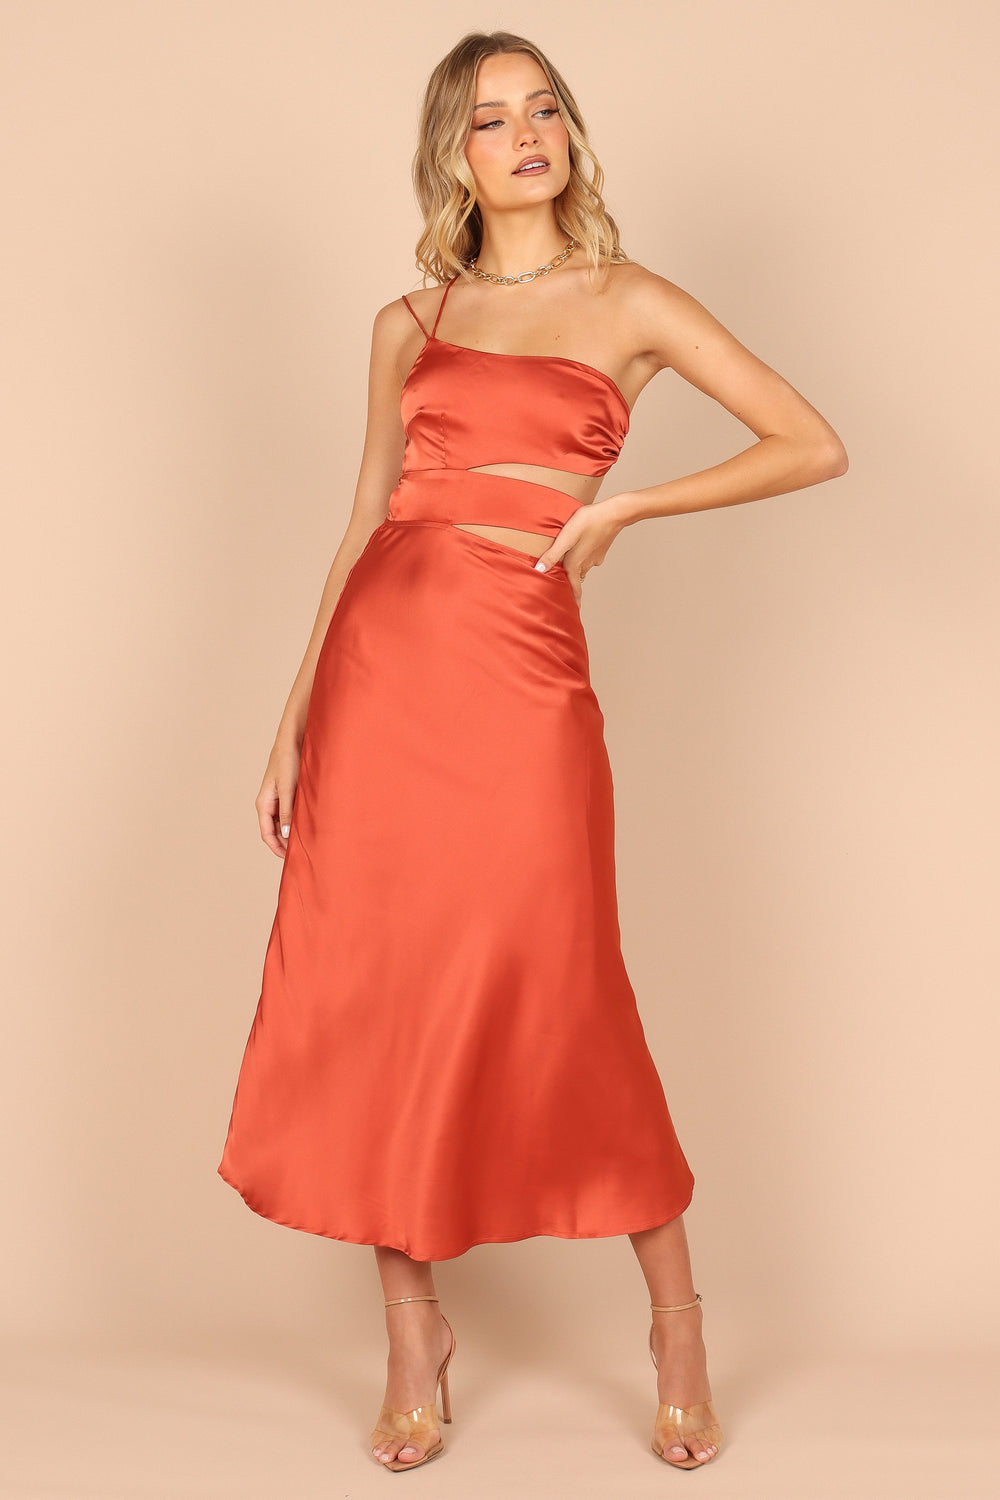 Petal and Pup USA DRESSES Forelle One Shoulder Cut Out Midi Dress - Rust